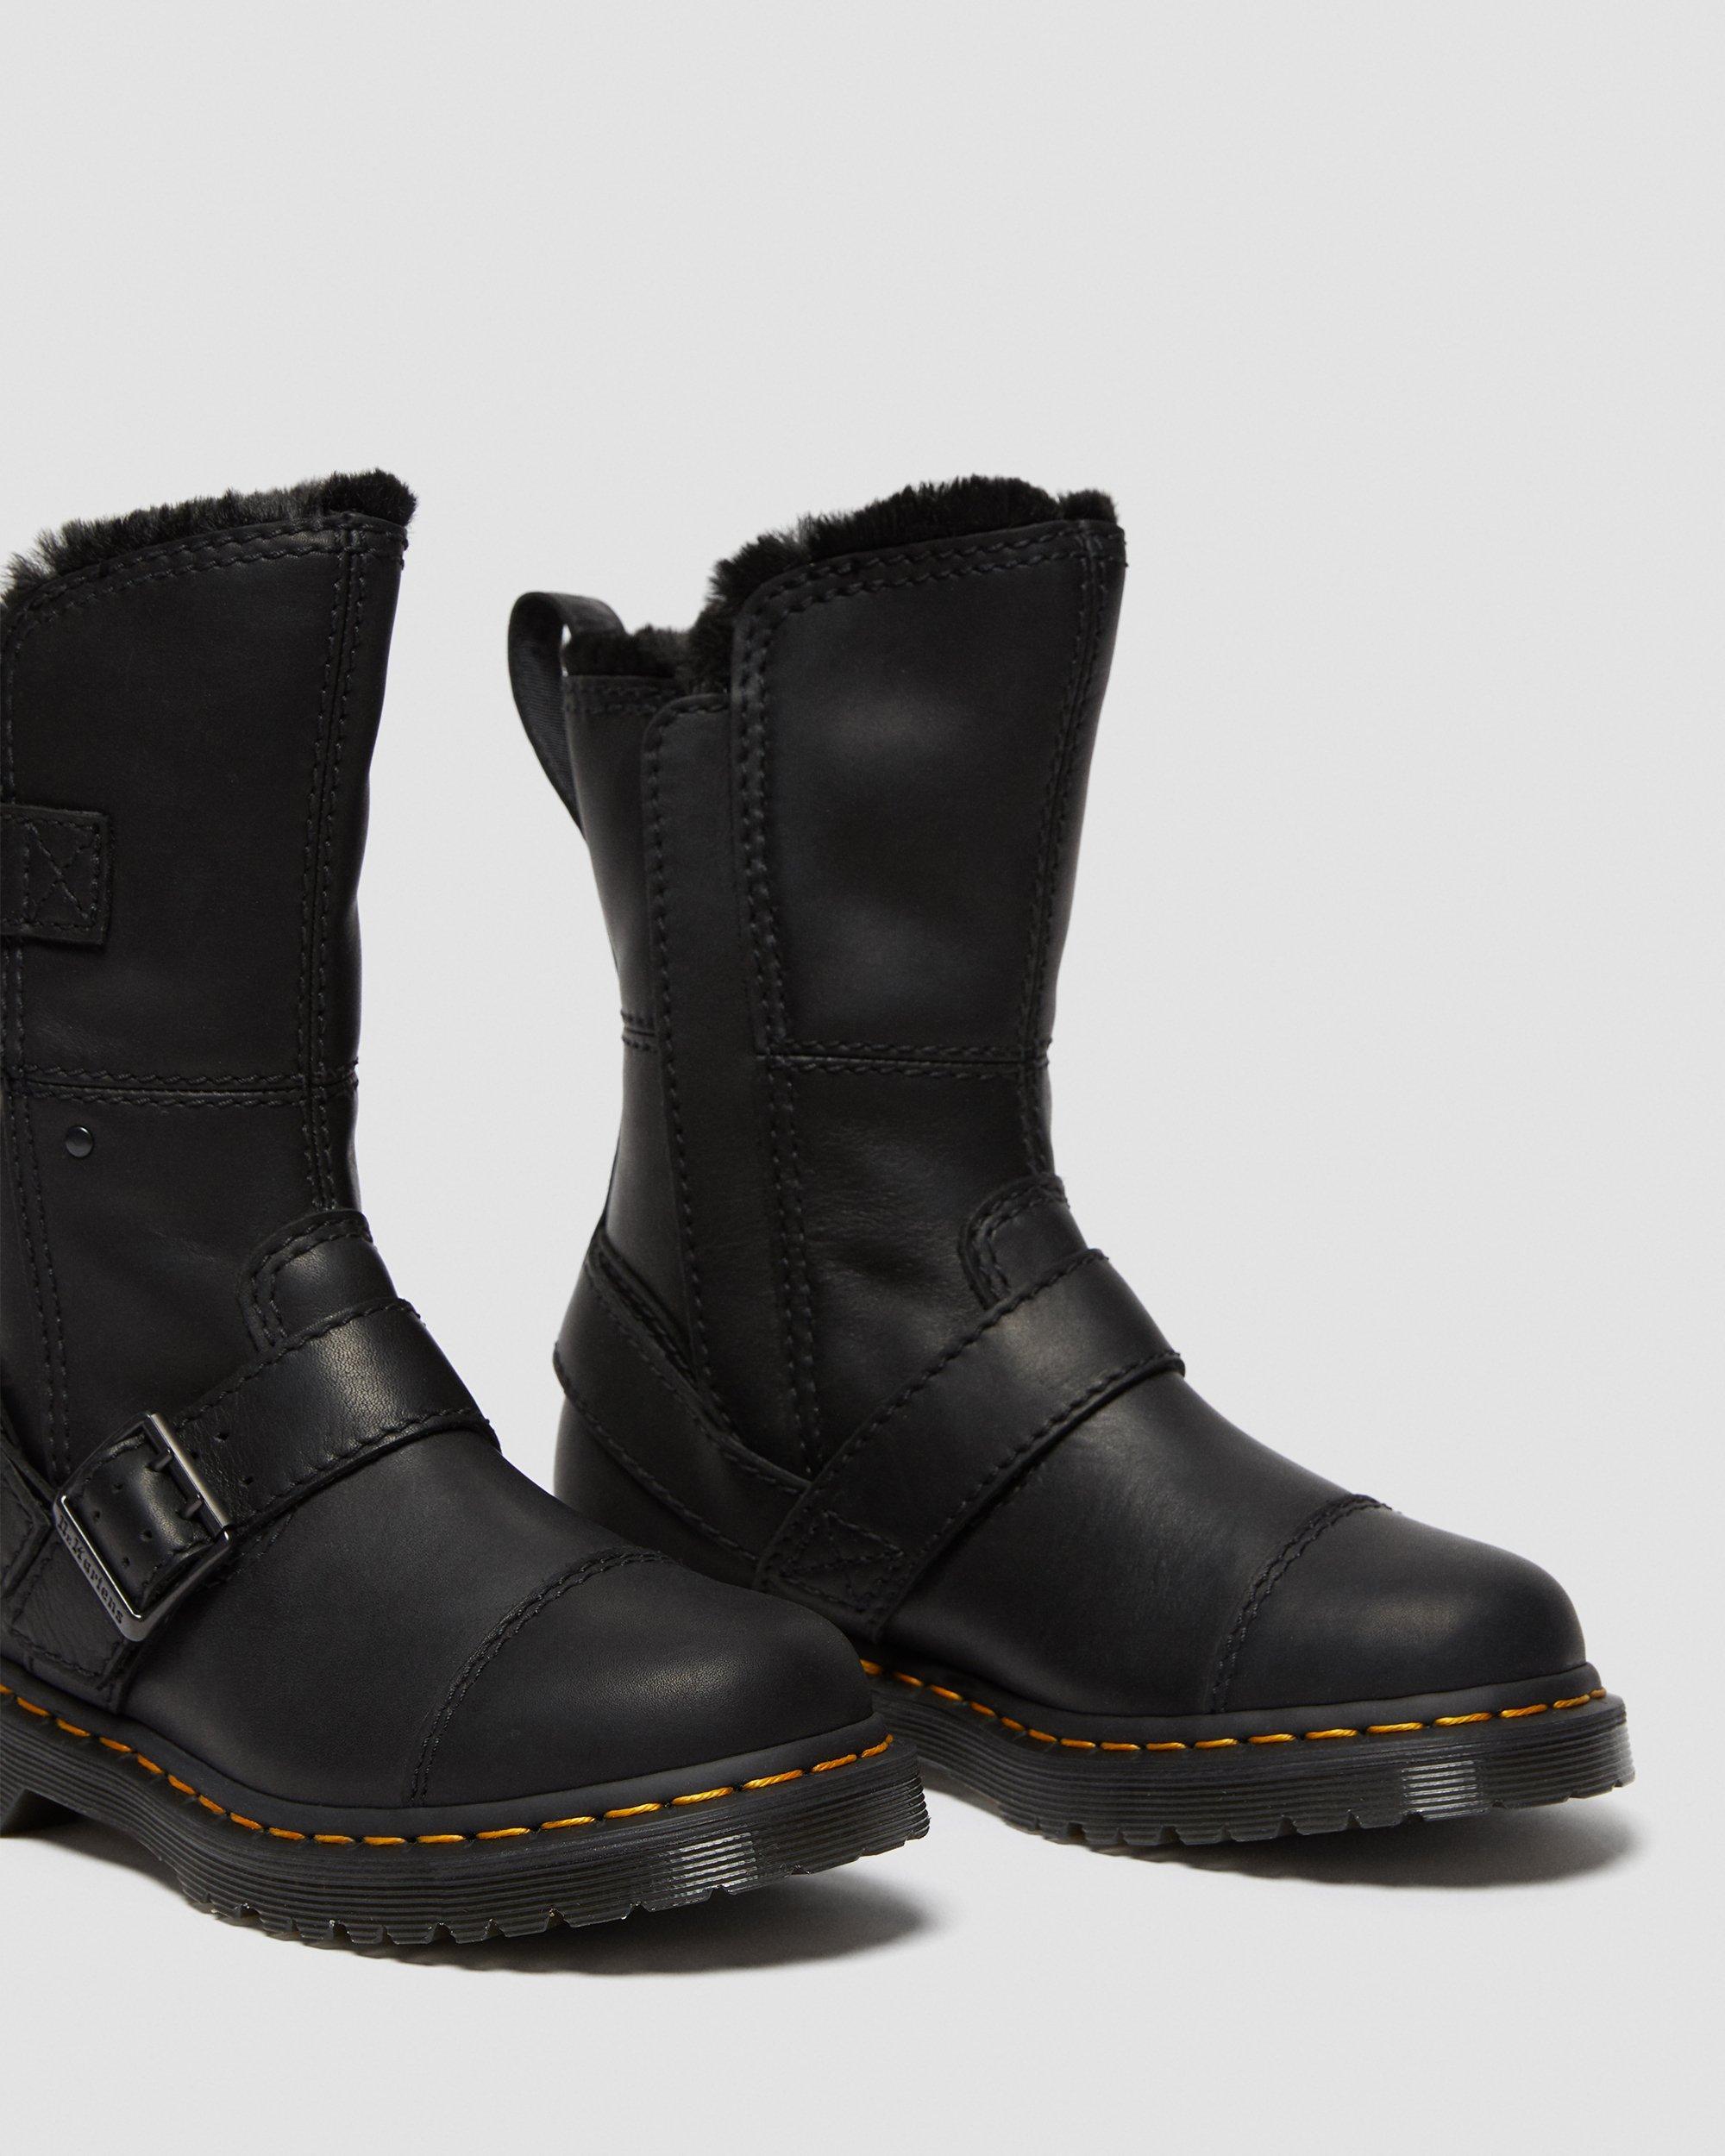 Dr. Martens Kristy Mid Calf Faux Fur Leather Boots in Black | Lyst